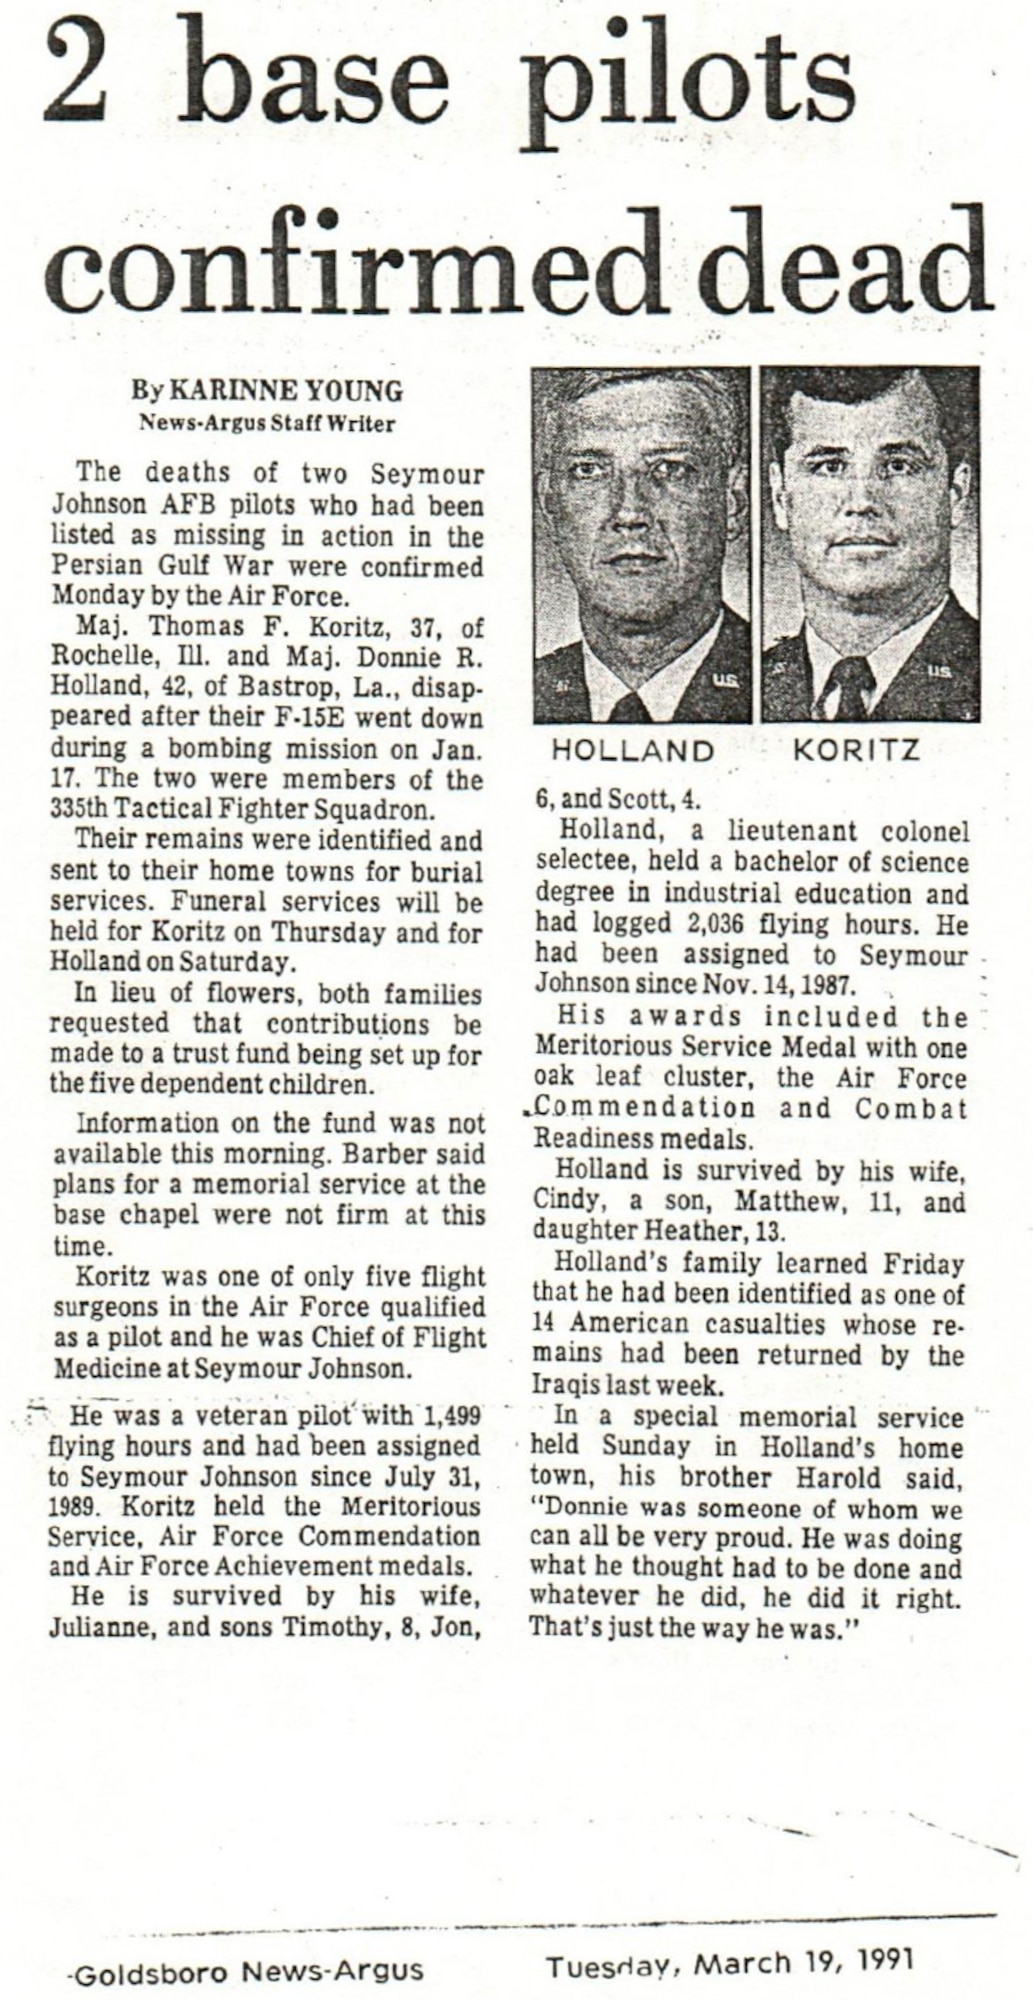 A news clipping from the Goldsboro News-Argus tells the story how Maj. Thomas F. Koritz, former 335th Tactical Fighter Squadron flight surgeons and pilot, and Lt. Col. Donnie R. Holland, former 335th TFS weapons system operator, gave their lives in the line of duty, from the Goldsboro News-Argus in Goldsboro North Carolina, March 19, 1991.